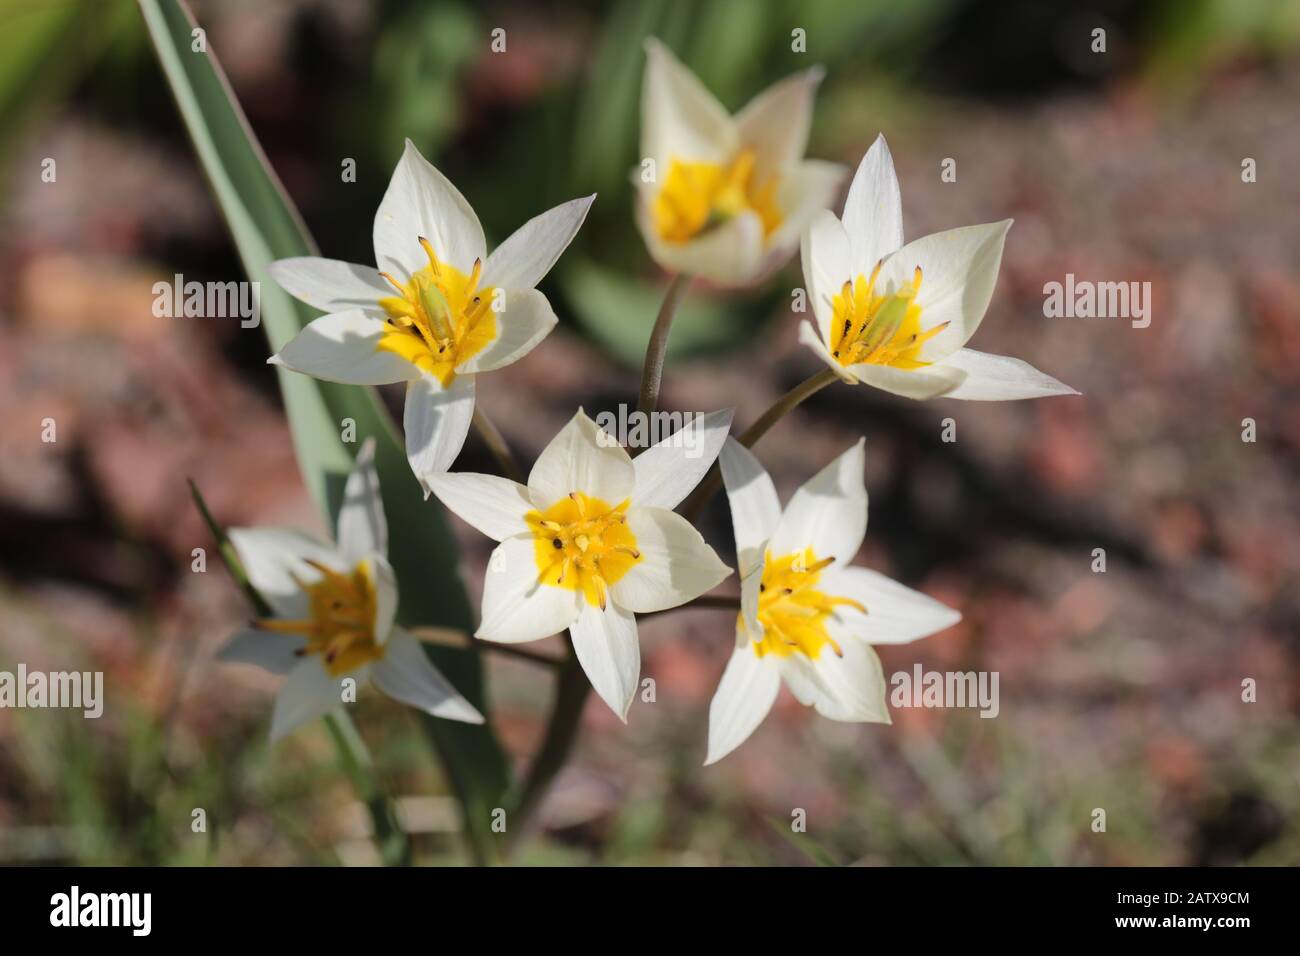 Tulipa turkestanica pollinated by a bee in spring Stock Photo